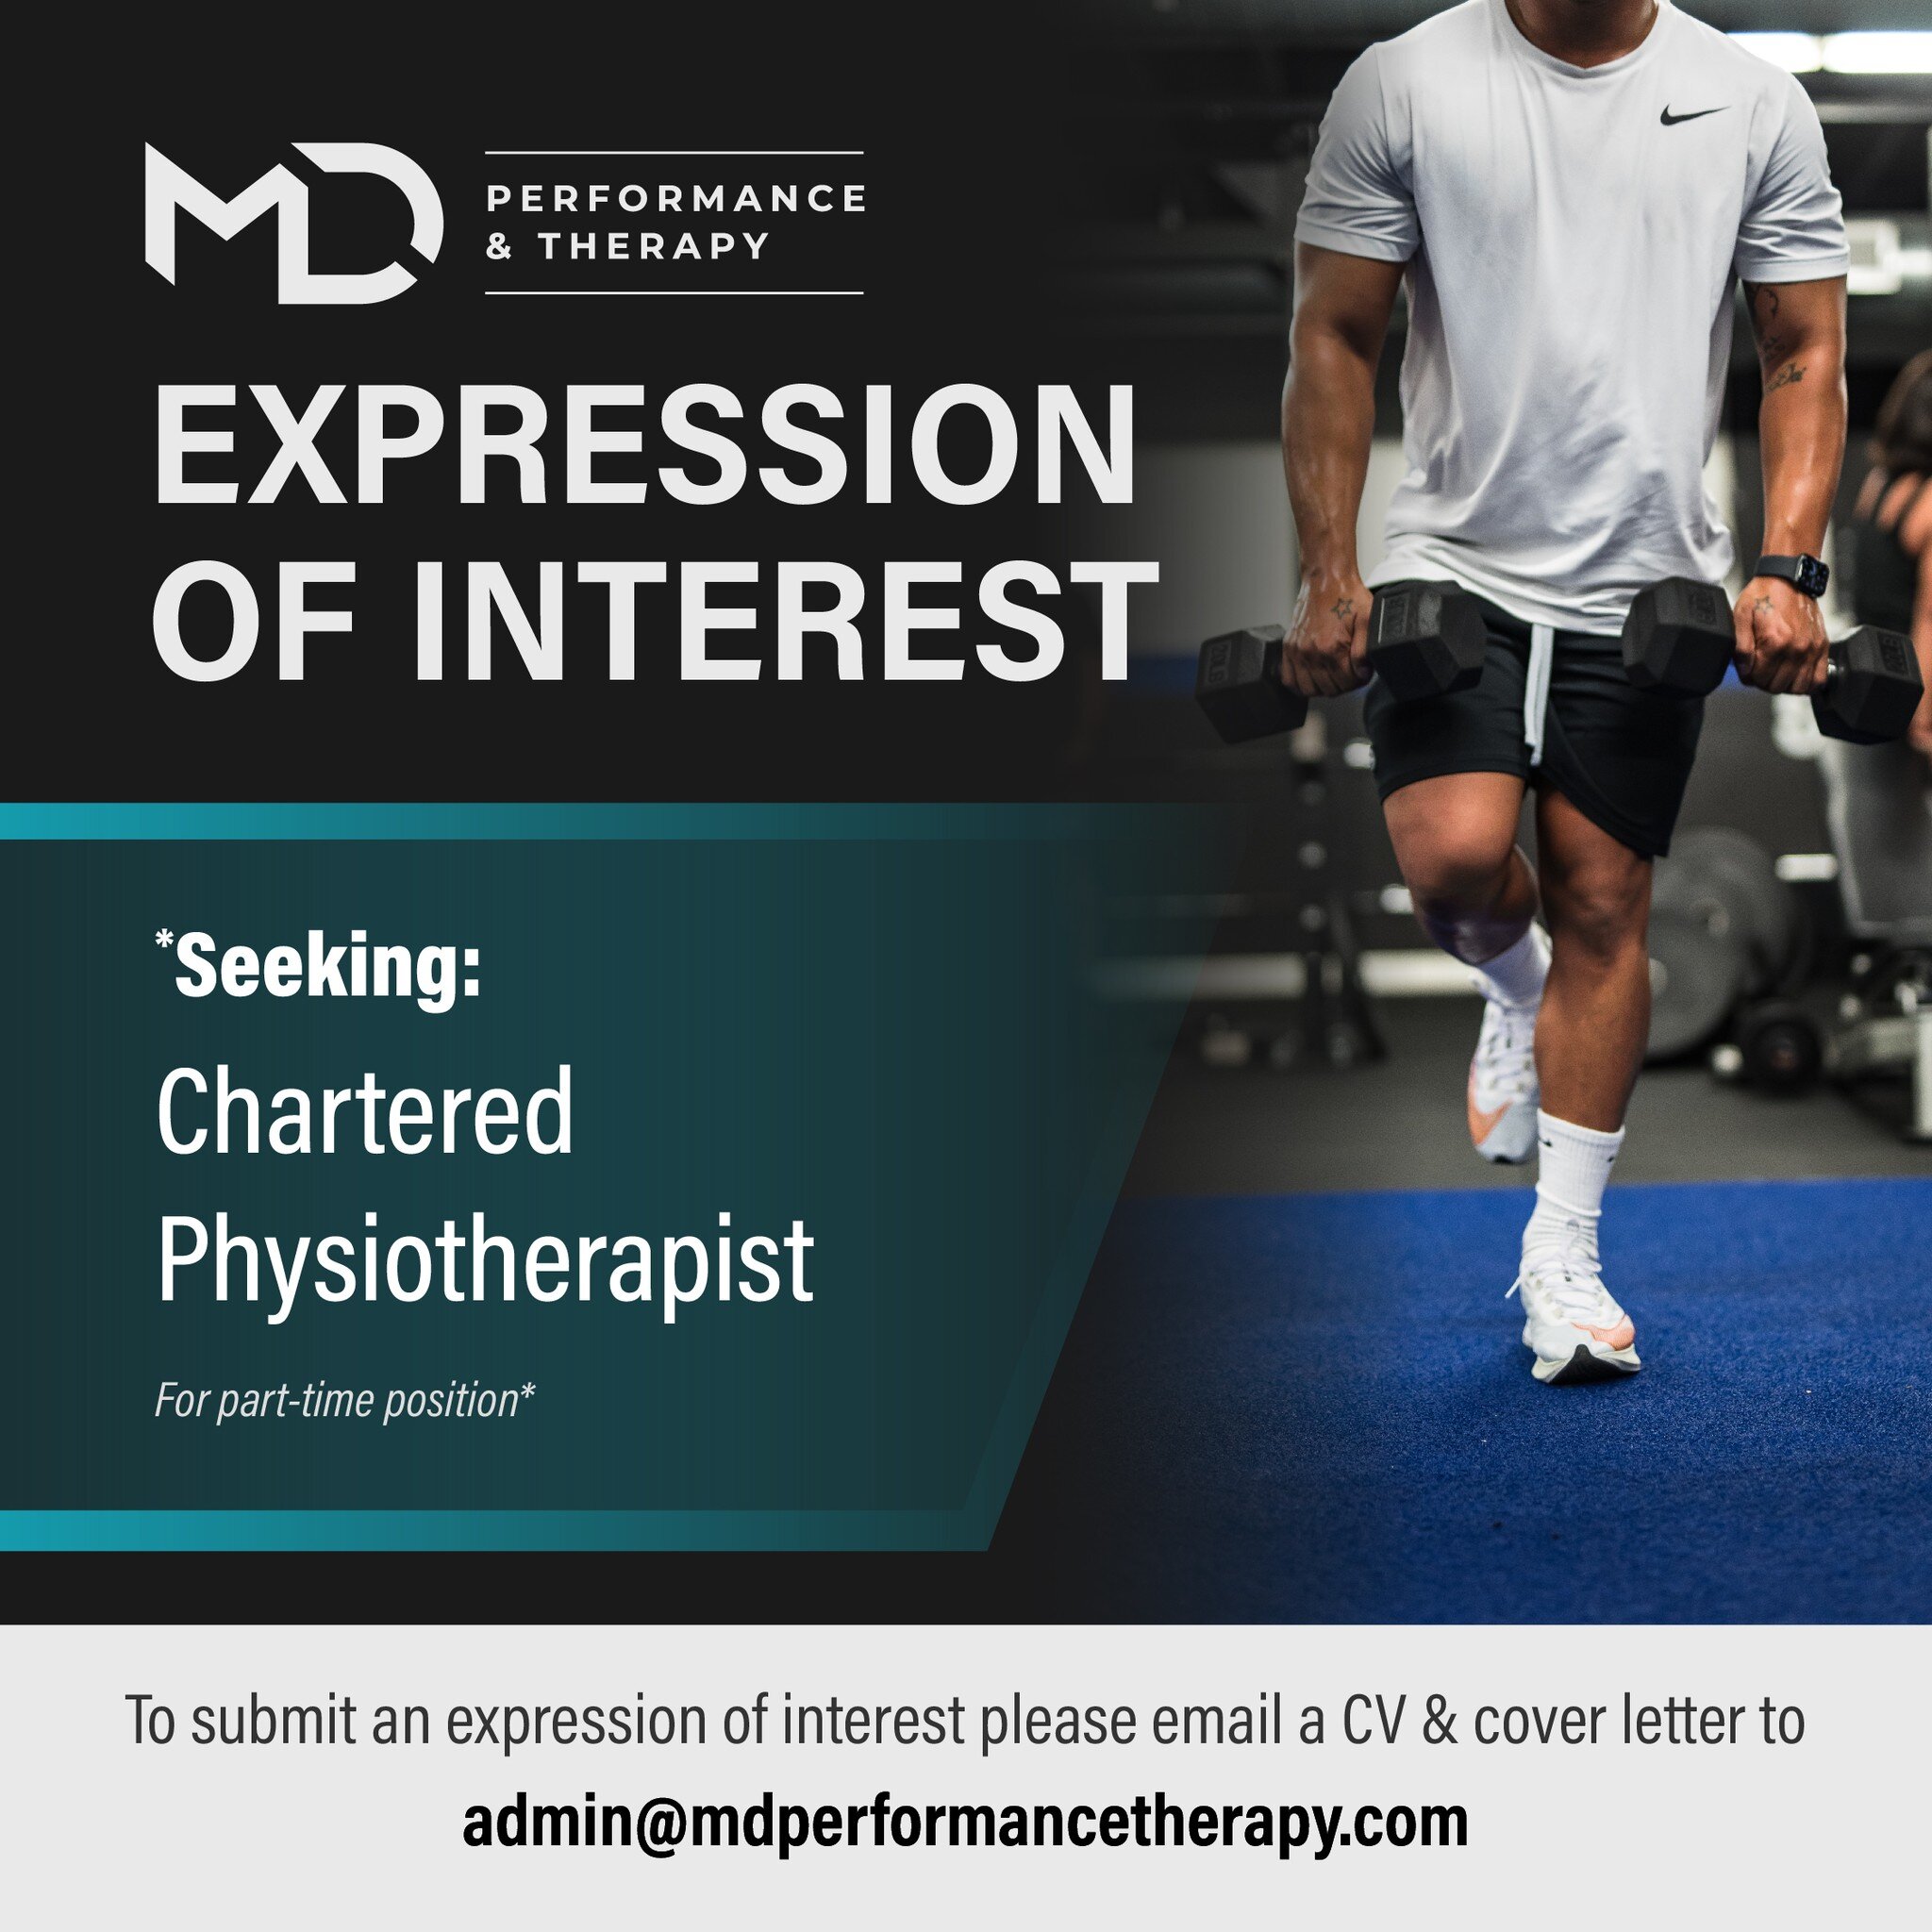 Seeking expressions of interest from suitably qualified practitioners for the following role at MD Performance &amp; Therapy:

⬜️ Chartered Physiotherapist

The ideal candidate will be passionate, ambitious and eager to learn and develop as a practit